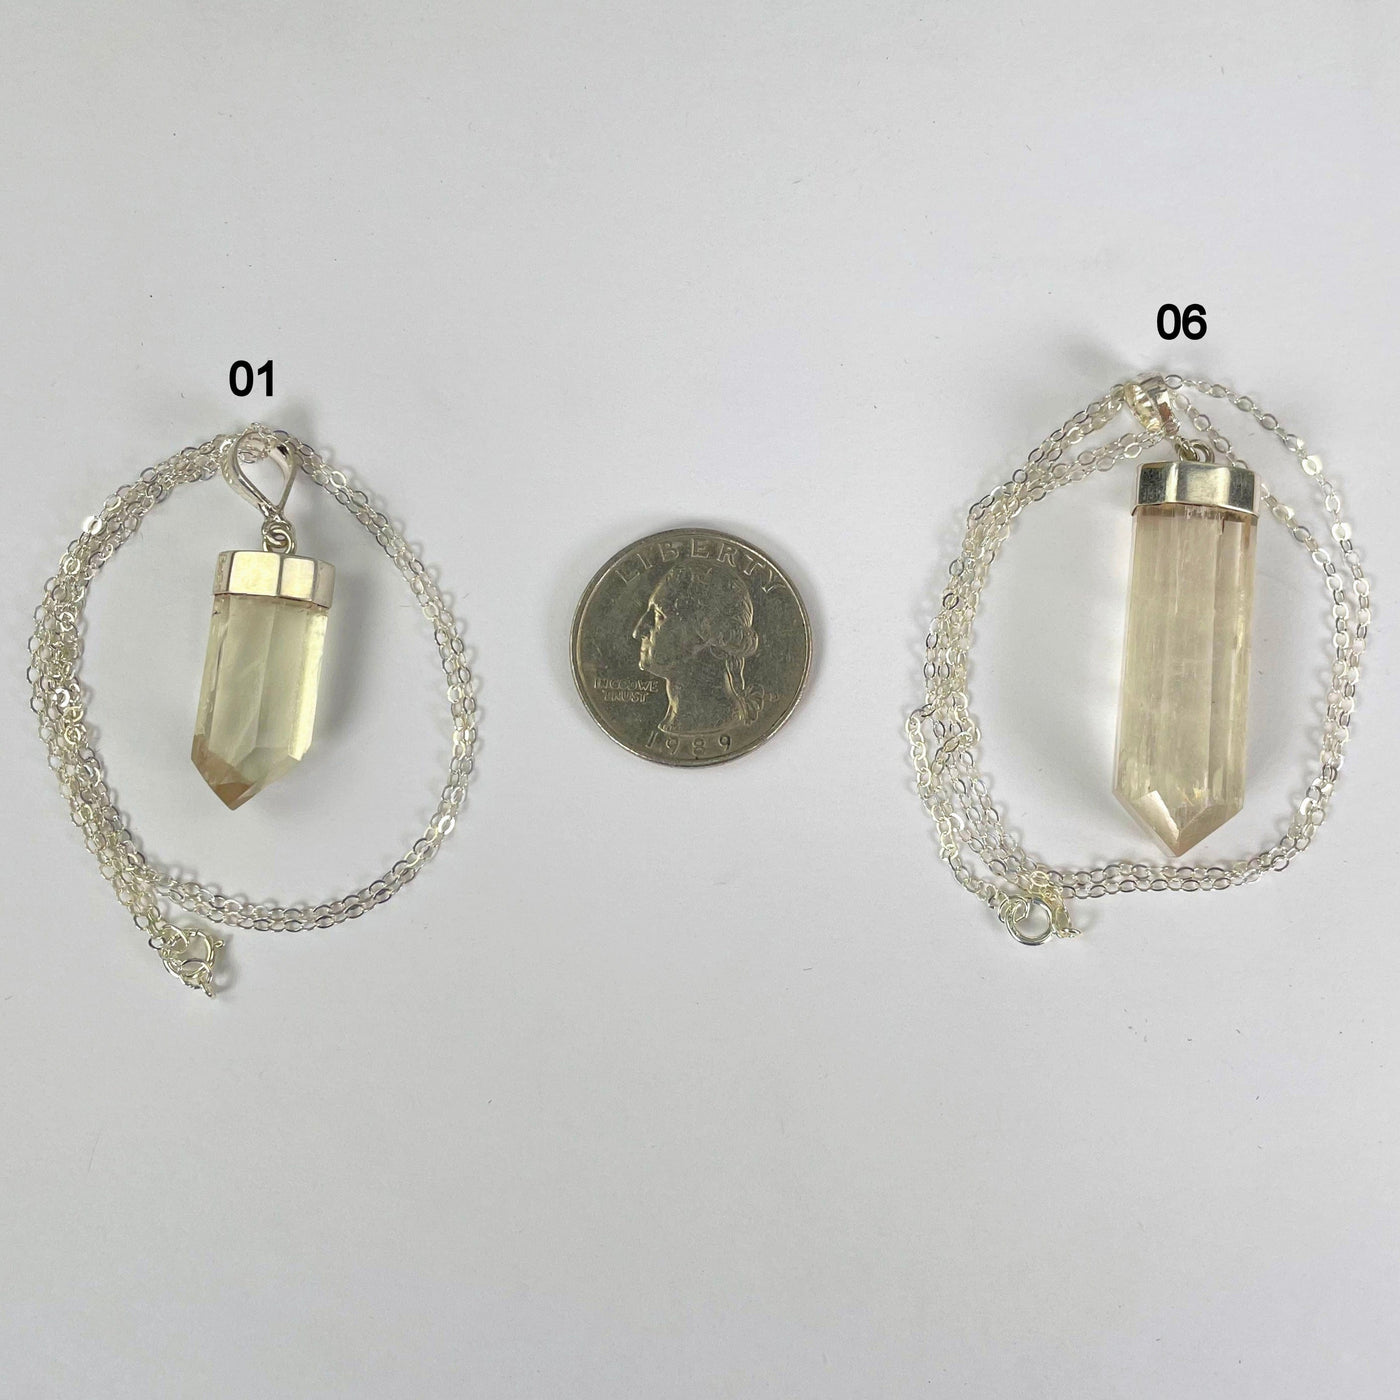 kunzite necklace options 01 and 06 (smallest and biggest) with quarter for size reference